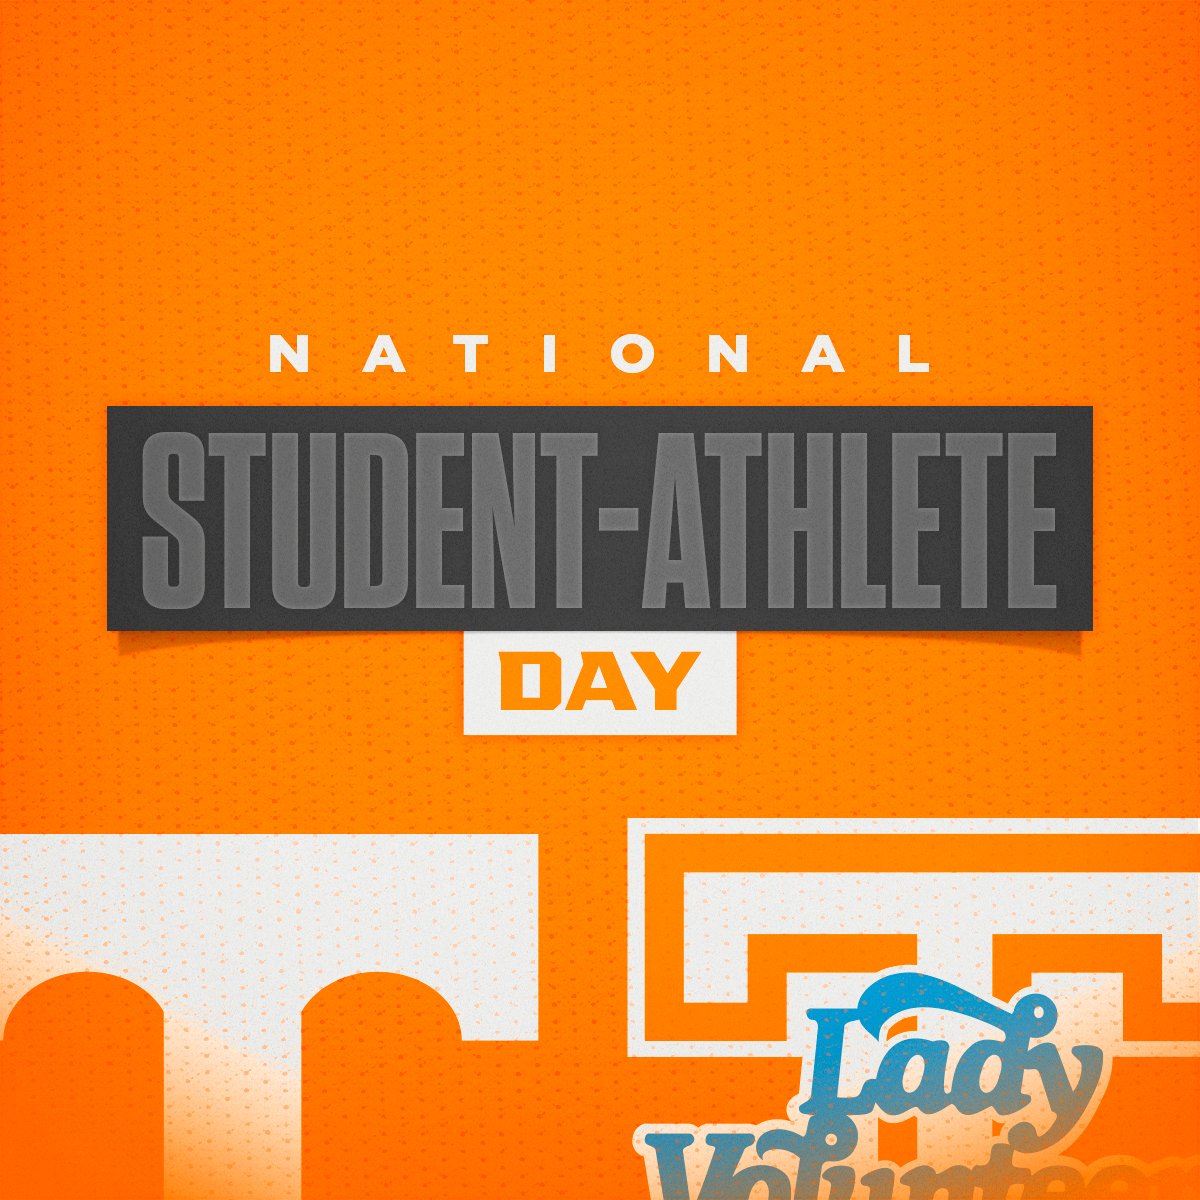 Recognizing our Vols and Lady Vols, today and every day. #StudentAthleteDay // #GBO